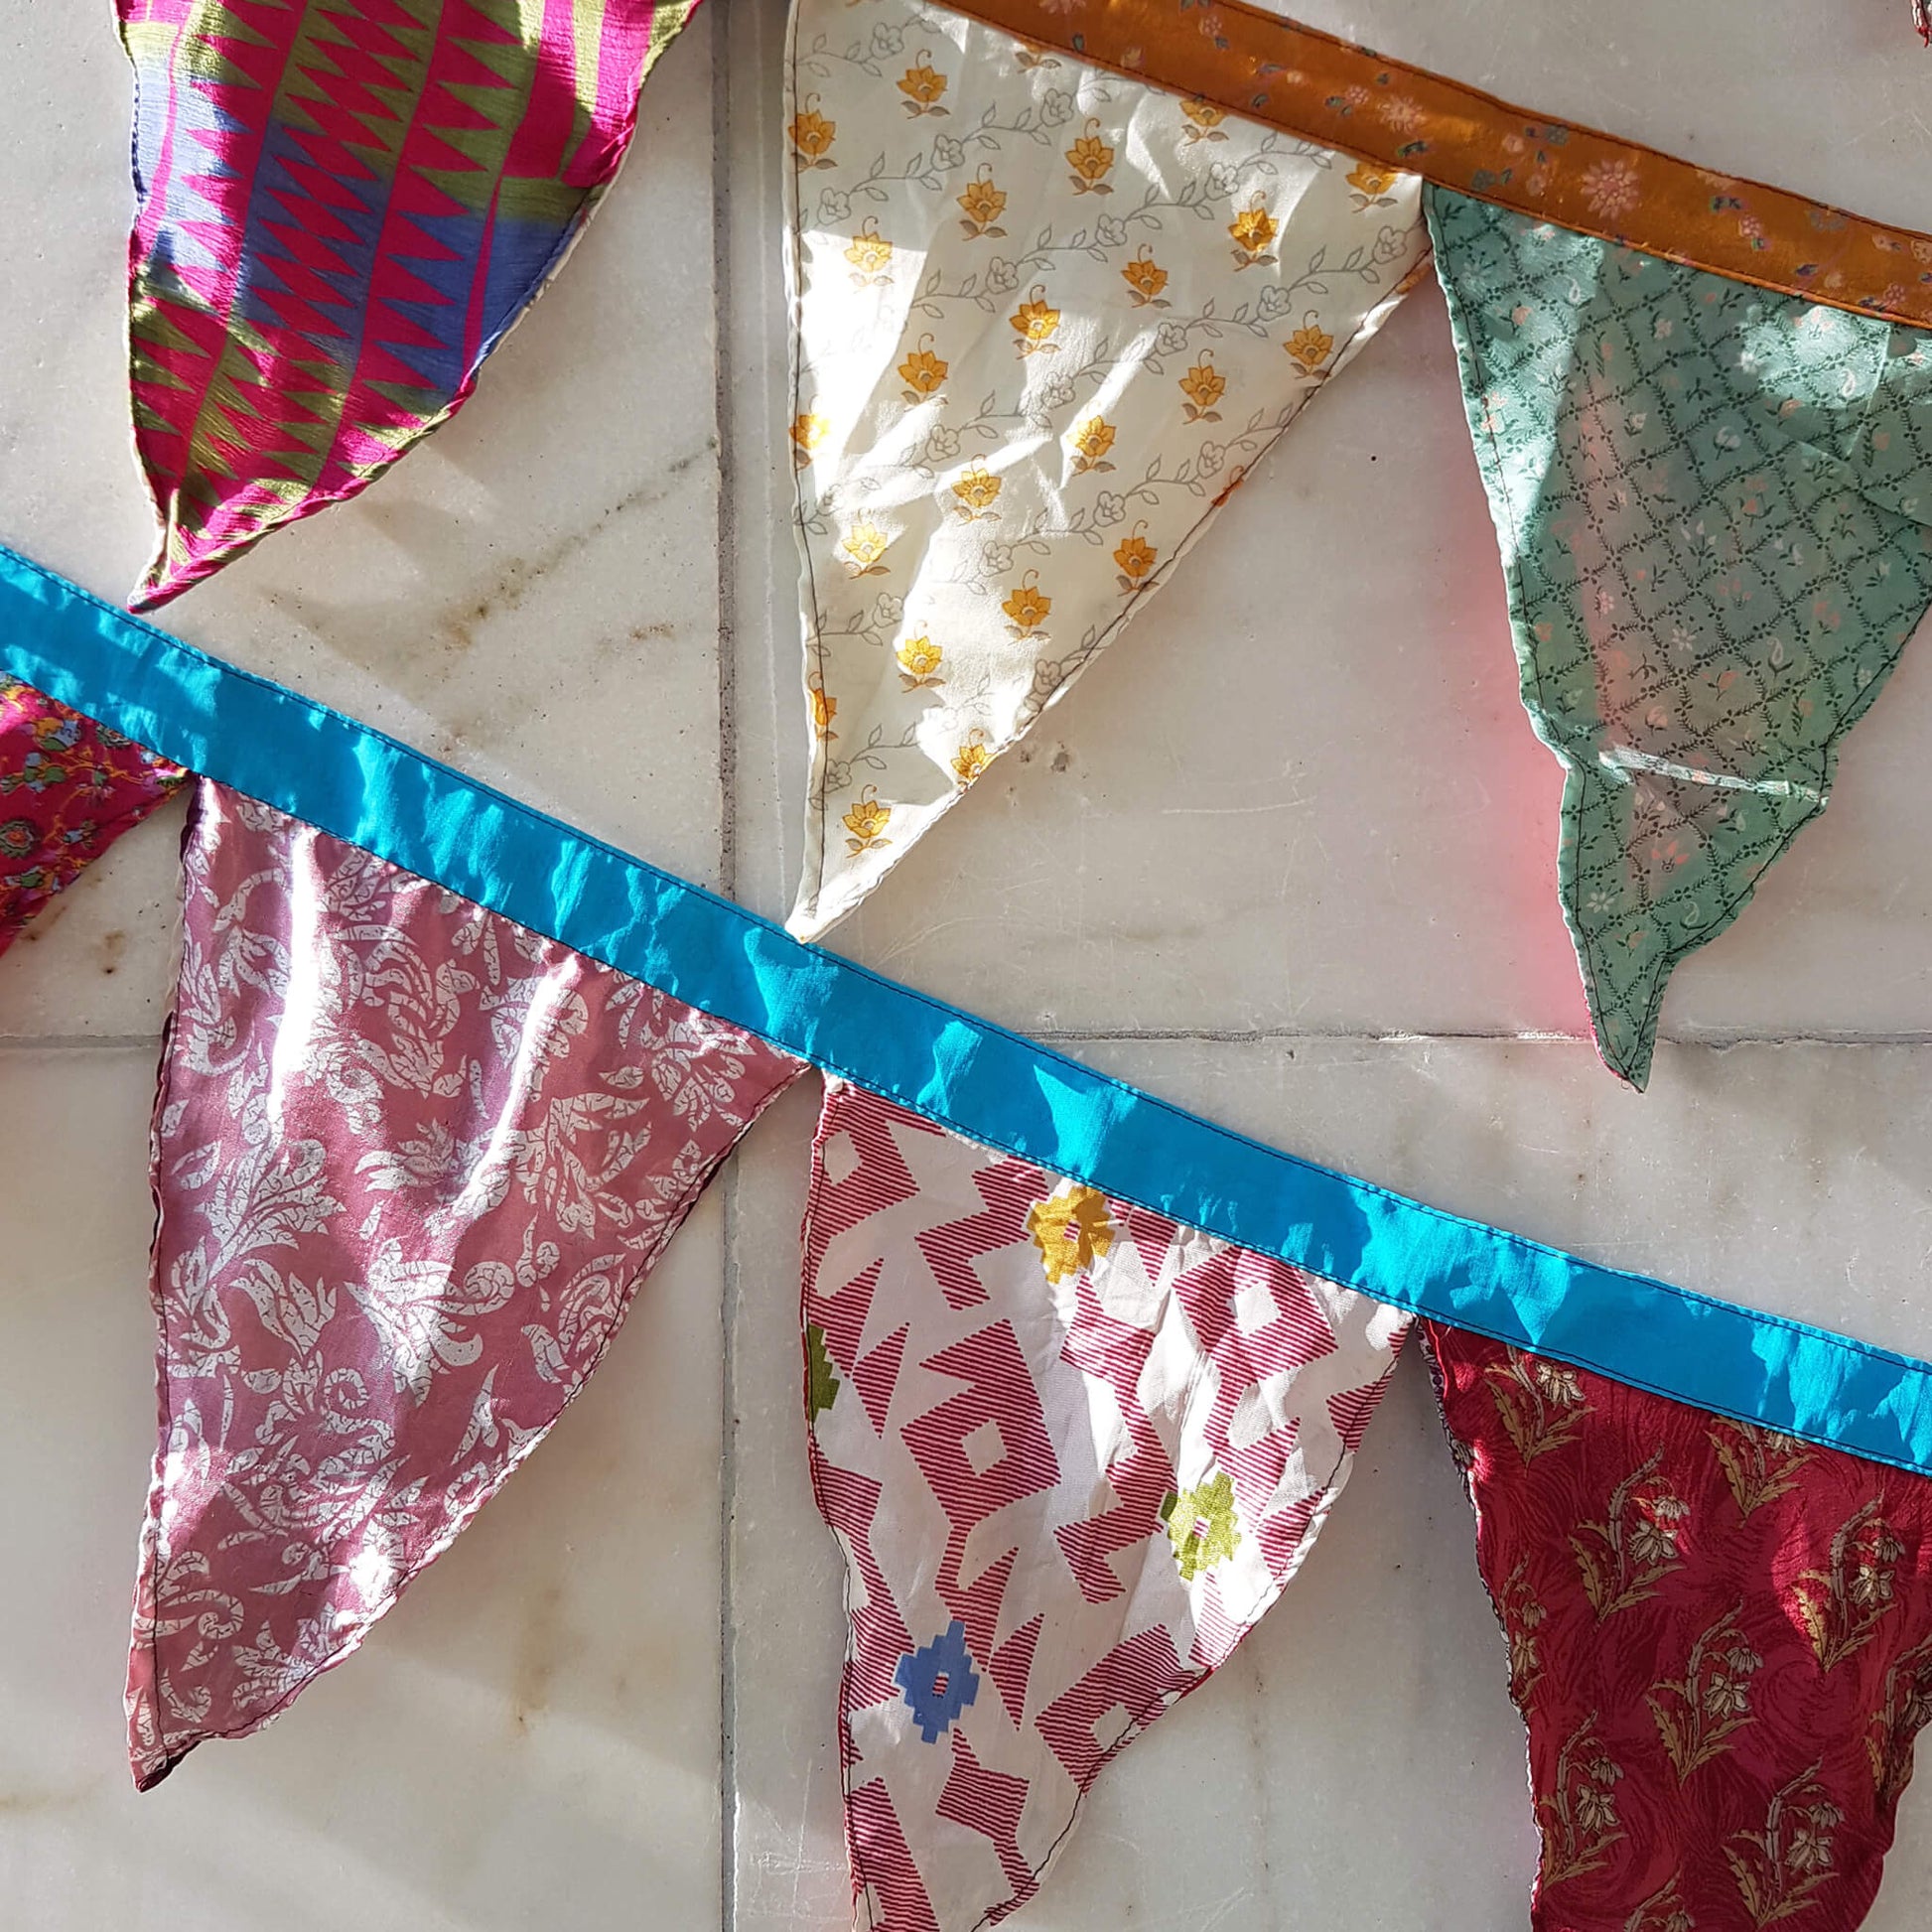 Silk Route Triangle Garland made of recycled Saris - Unik by Nature